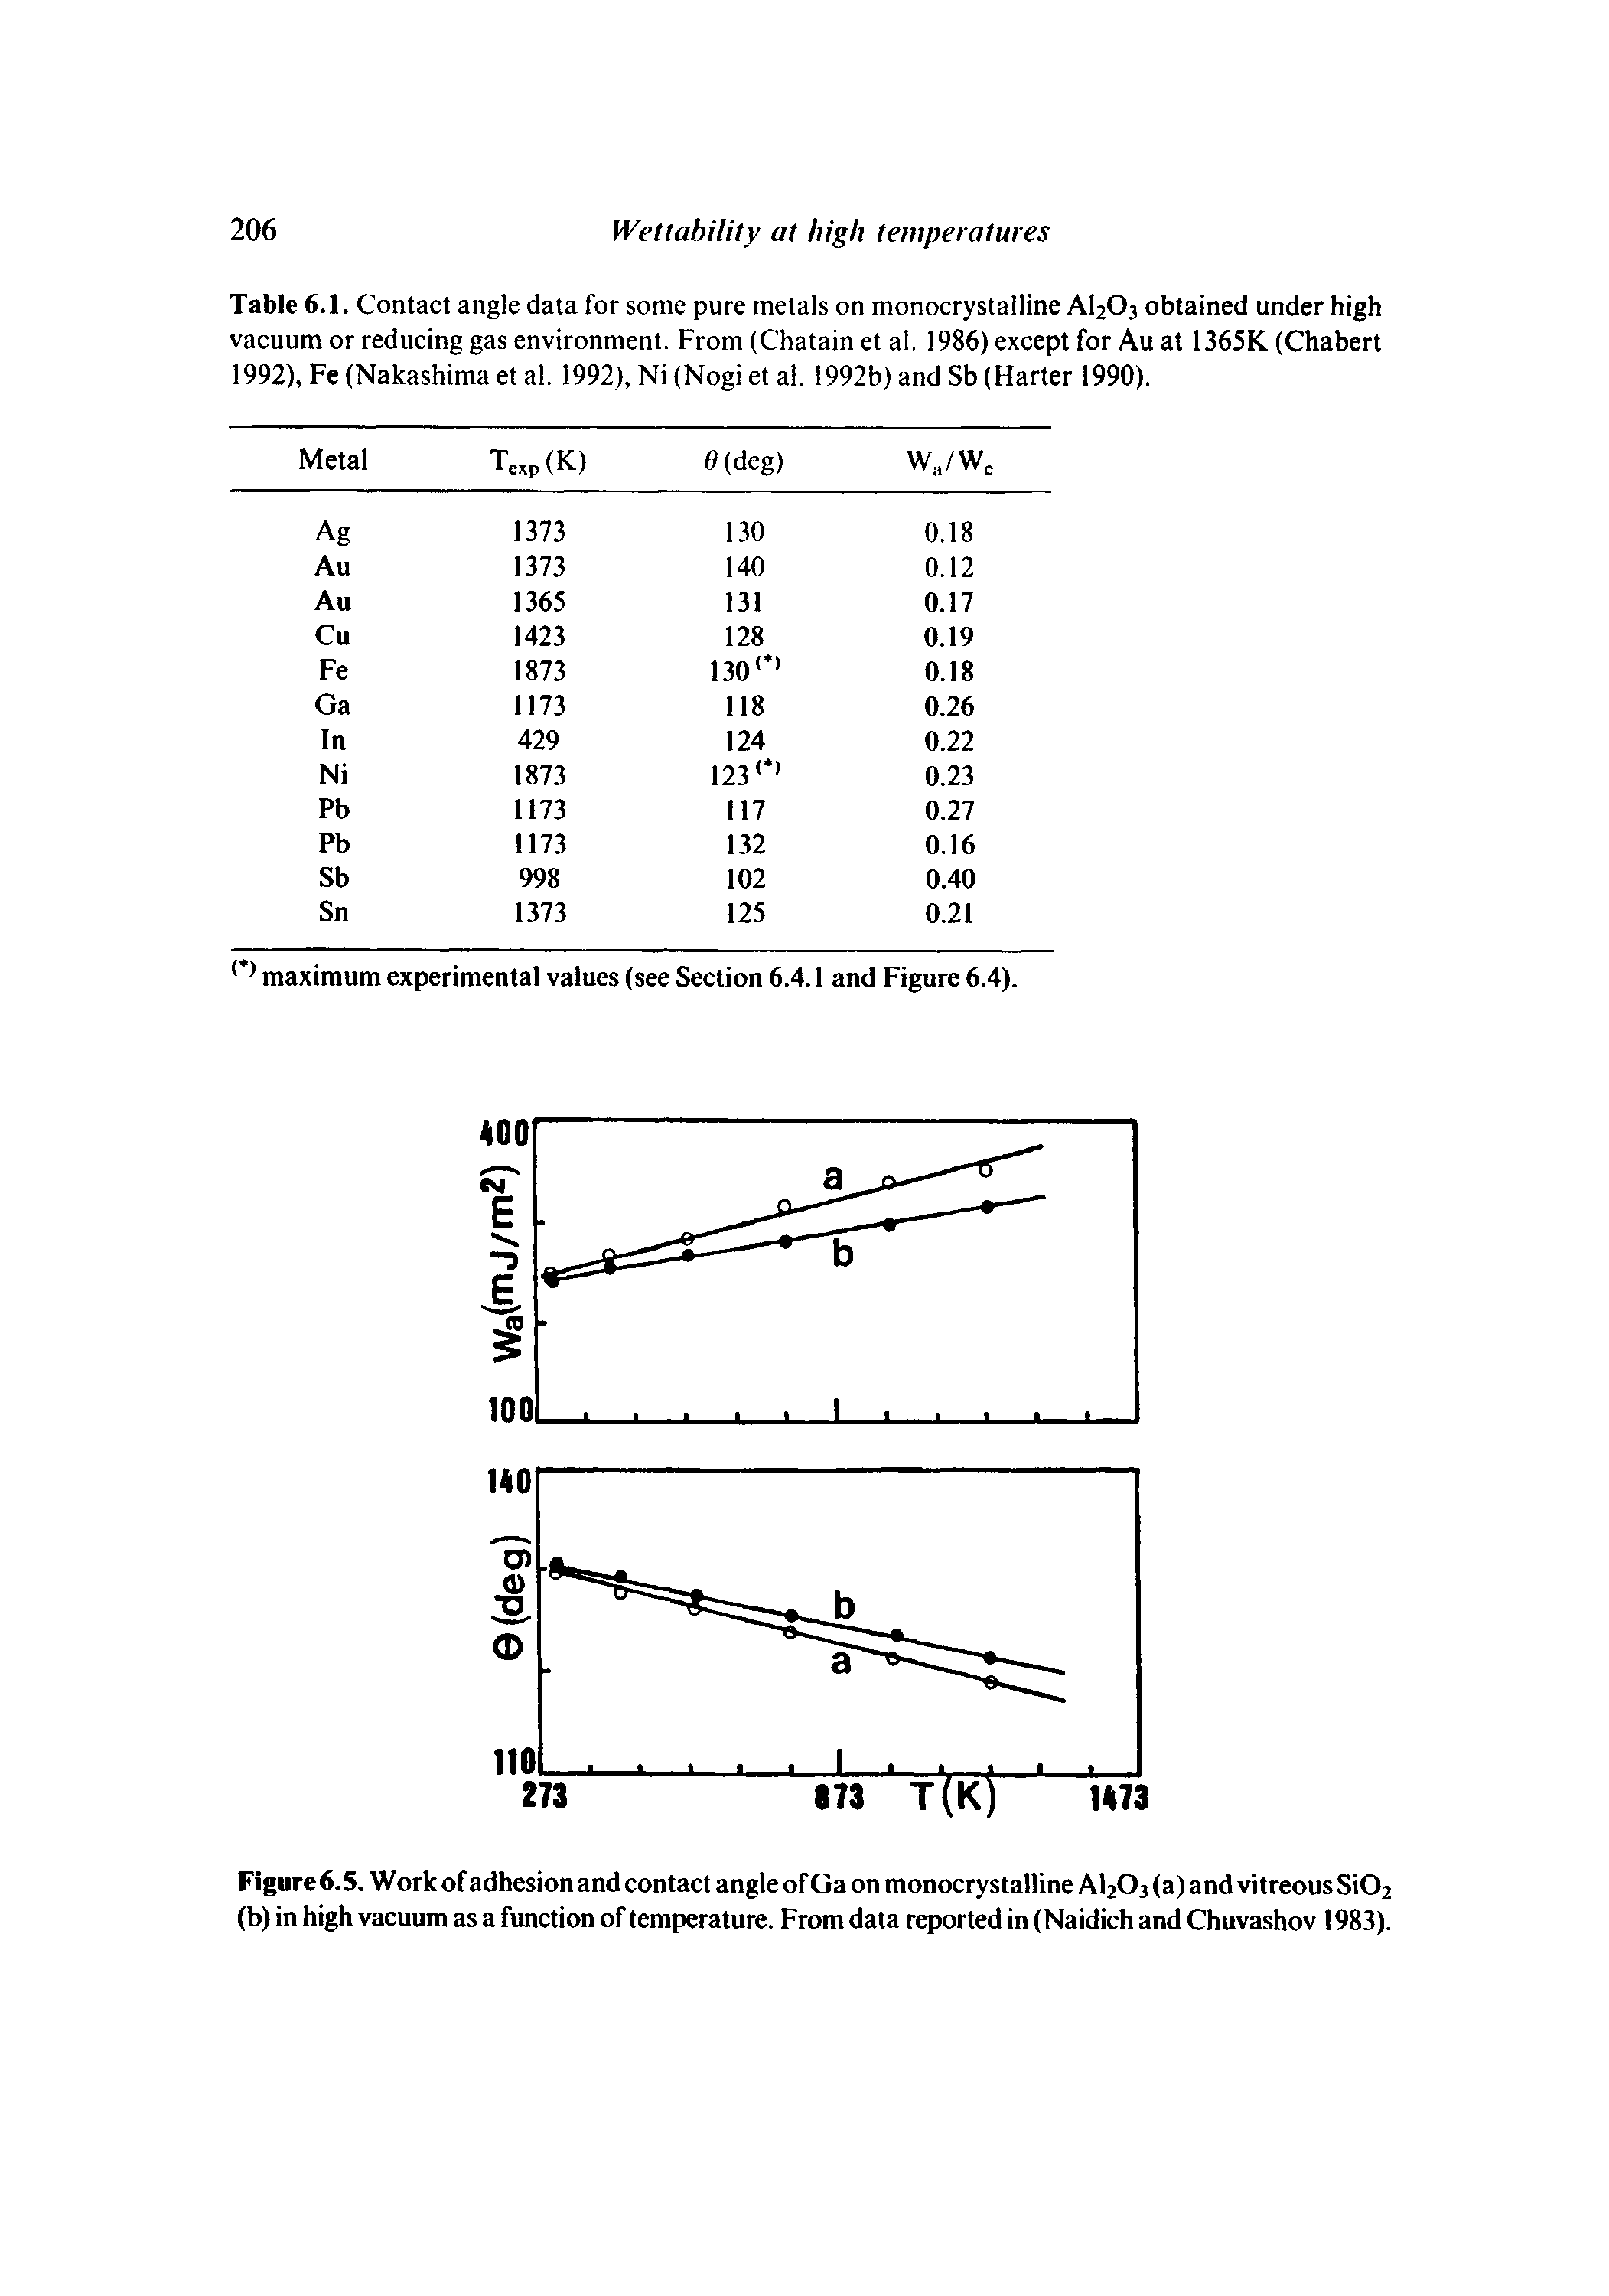 Table 6.1. Contact angle data for some pure metals on monocrystalline AI2O3 obtained under high vacuum or reducing gas environment. From (Chatain et al. 1986) except for Au at 1365K. (Chabert 1992), Fe (Nakashima et al. 1992), Ni (Nogi et al. 1992b) and Sb (Harter 1990).